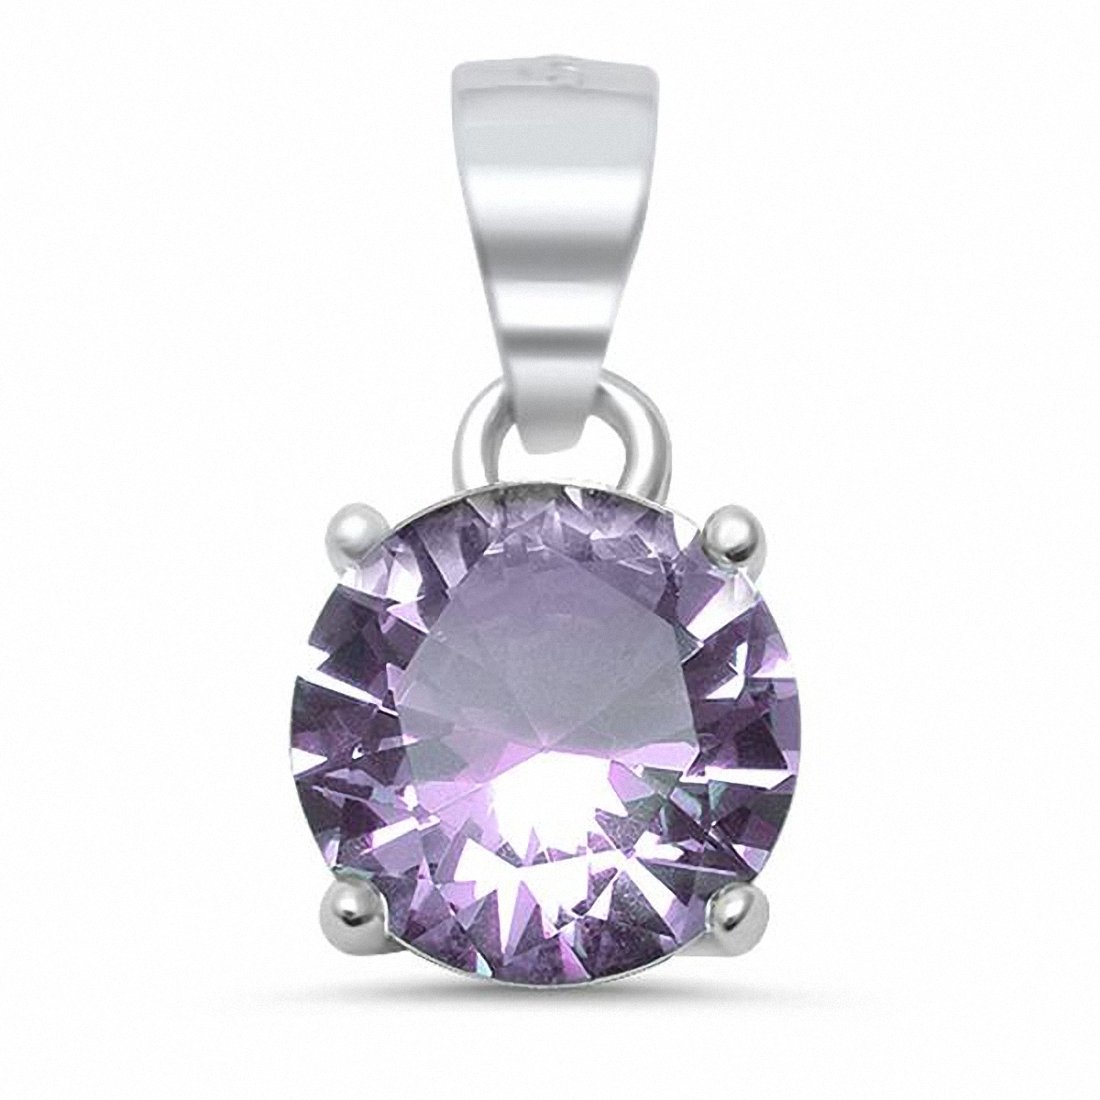 8mm Solitaire Pendant Round Cubic Zirconia 925 Sterling Silver Choose Color